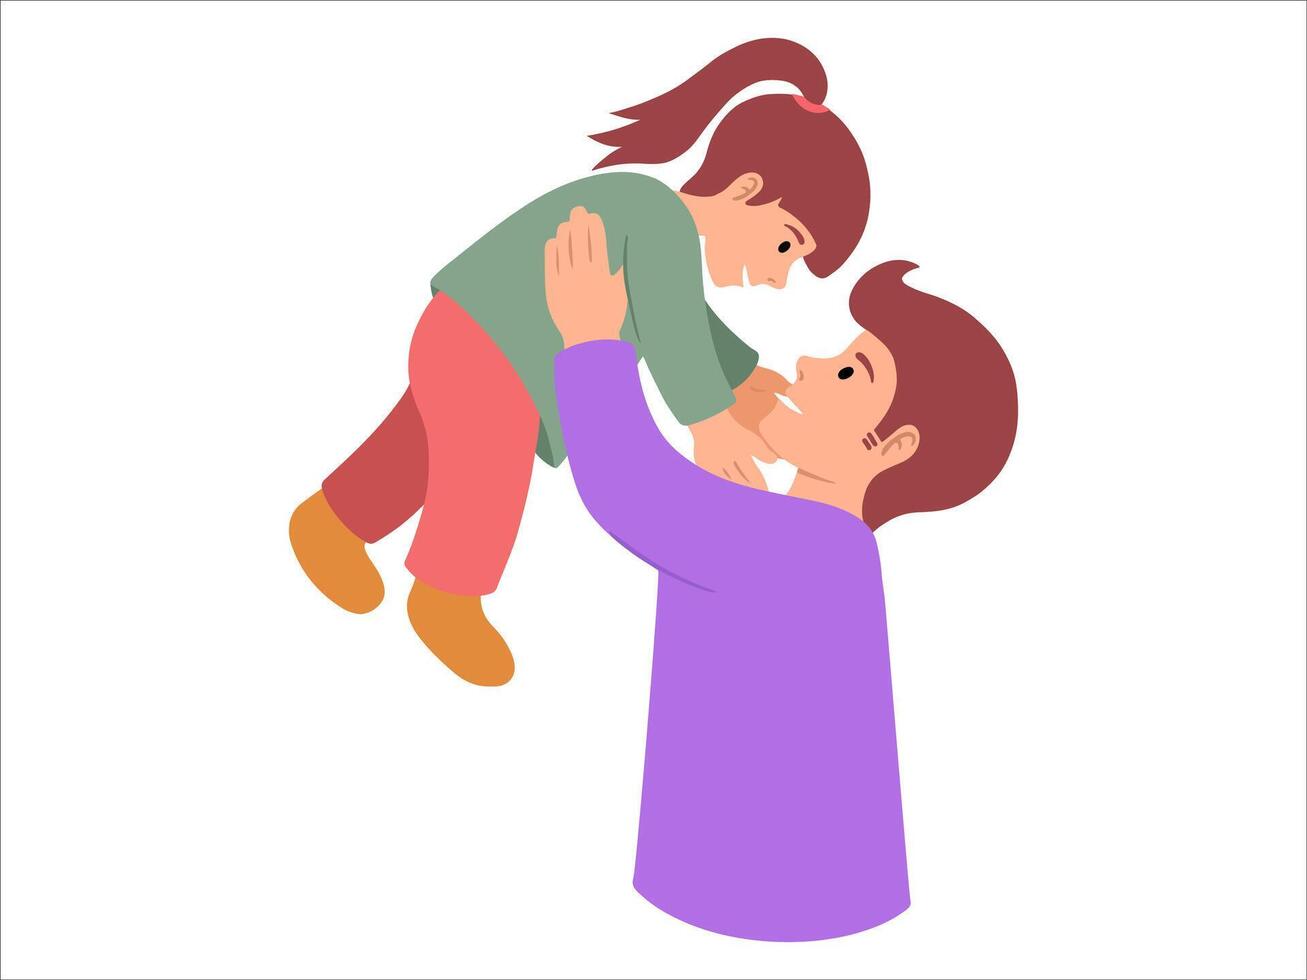 Father holding child or avatar icon illustration vector